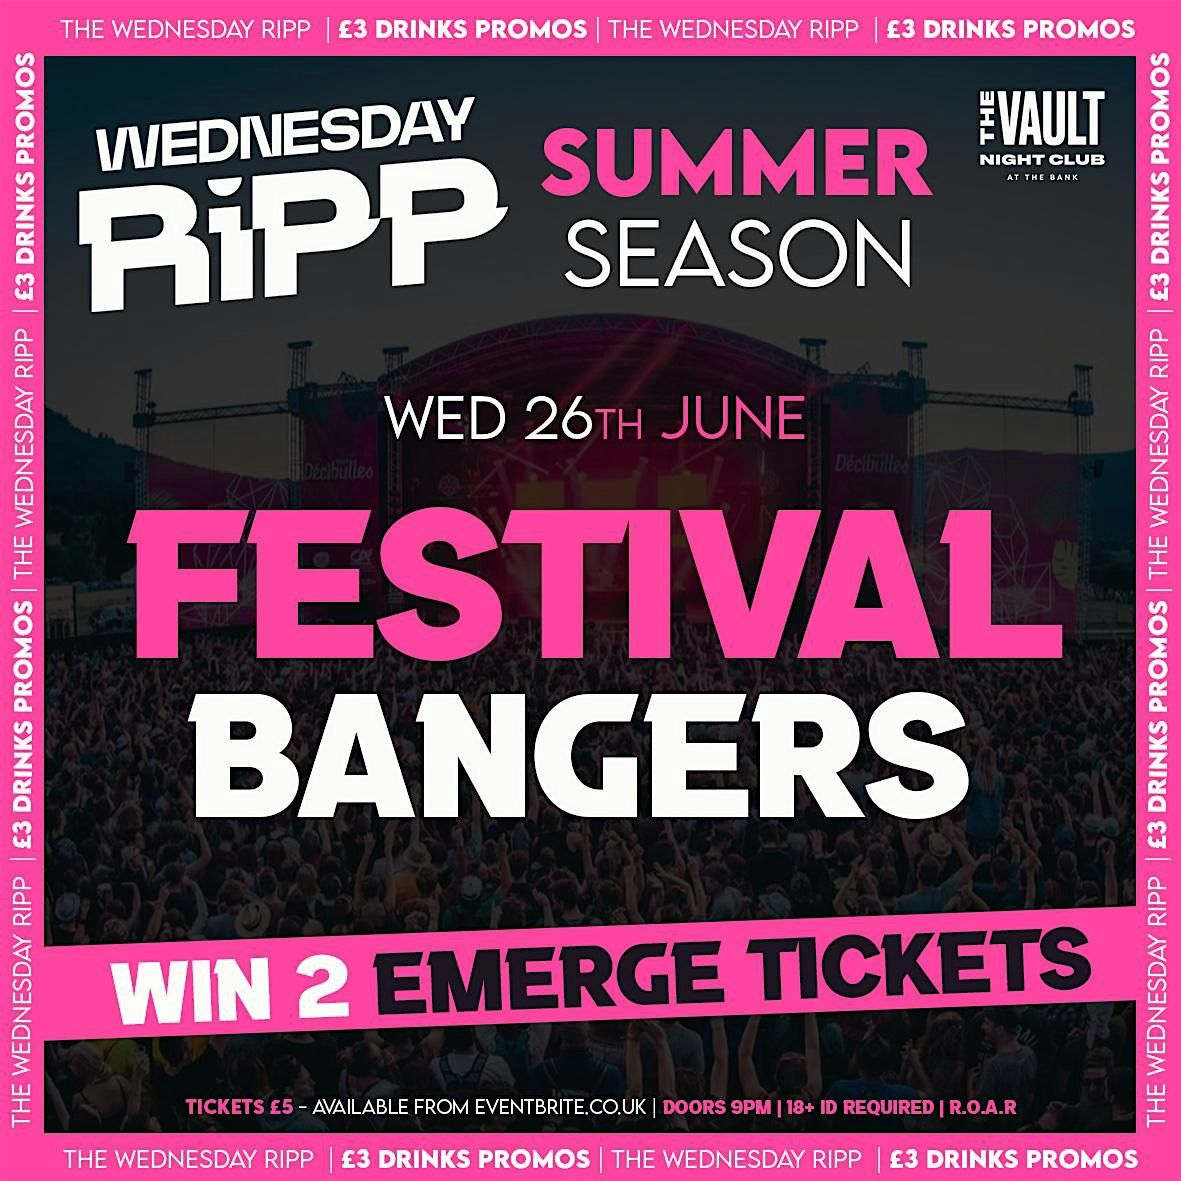 WEDNESDAY RIPP | FESTIVAL BANGERS | WED 26TH JUNE | WIN 2 EMERGE TICKETS